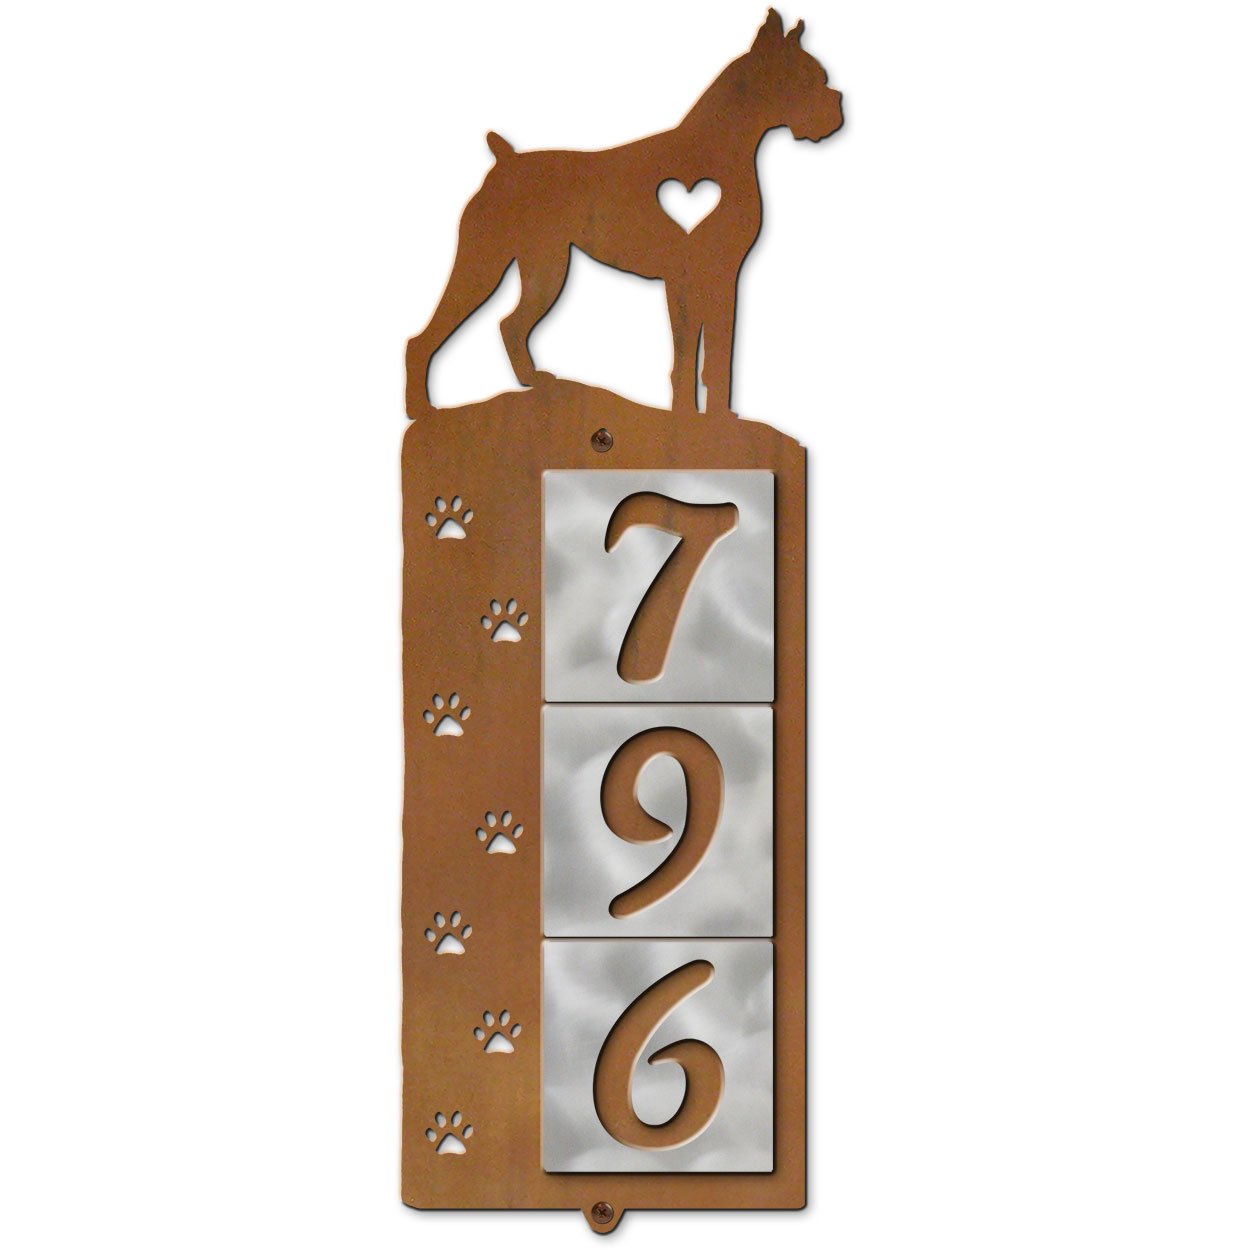 606163 - Boxer Dog Tracks 3-Digit Vertical House Numbers